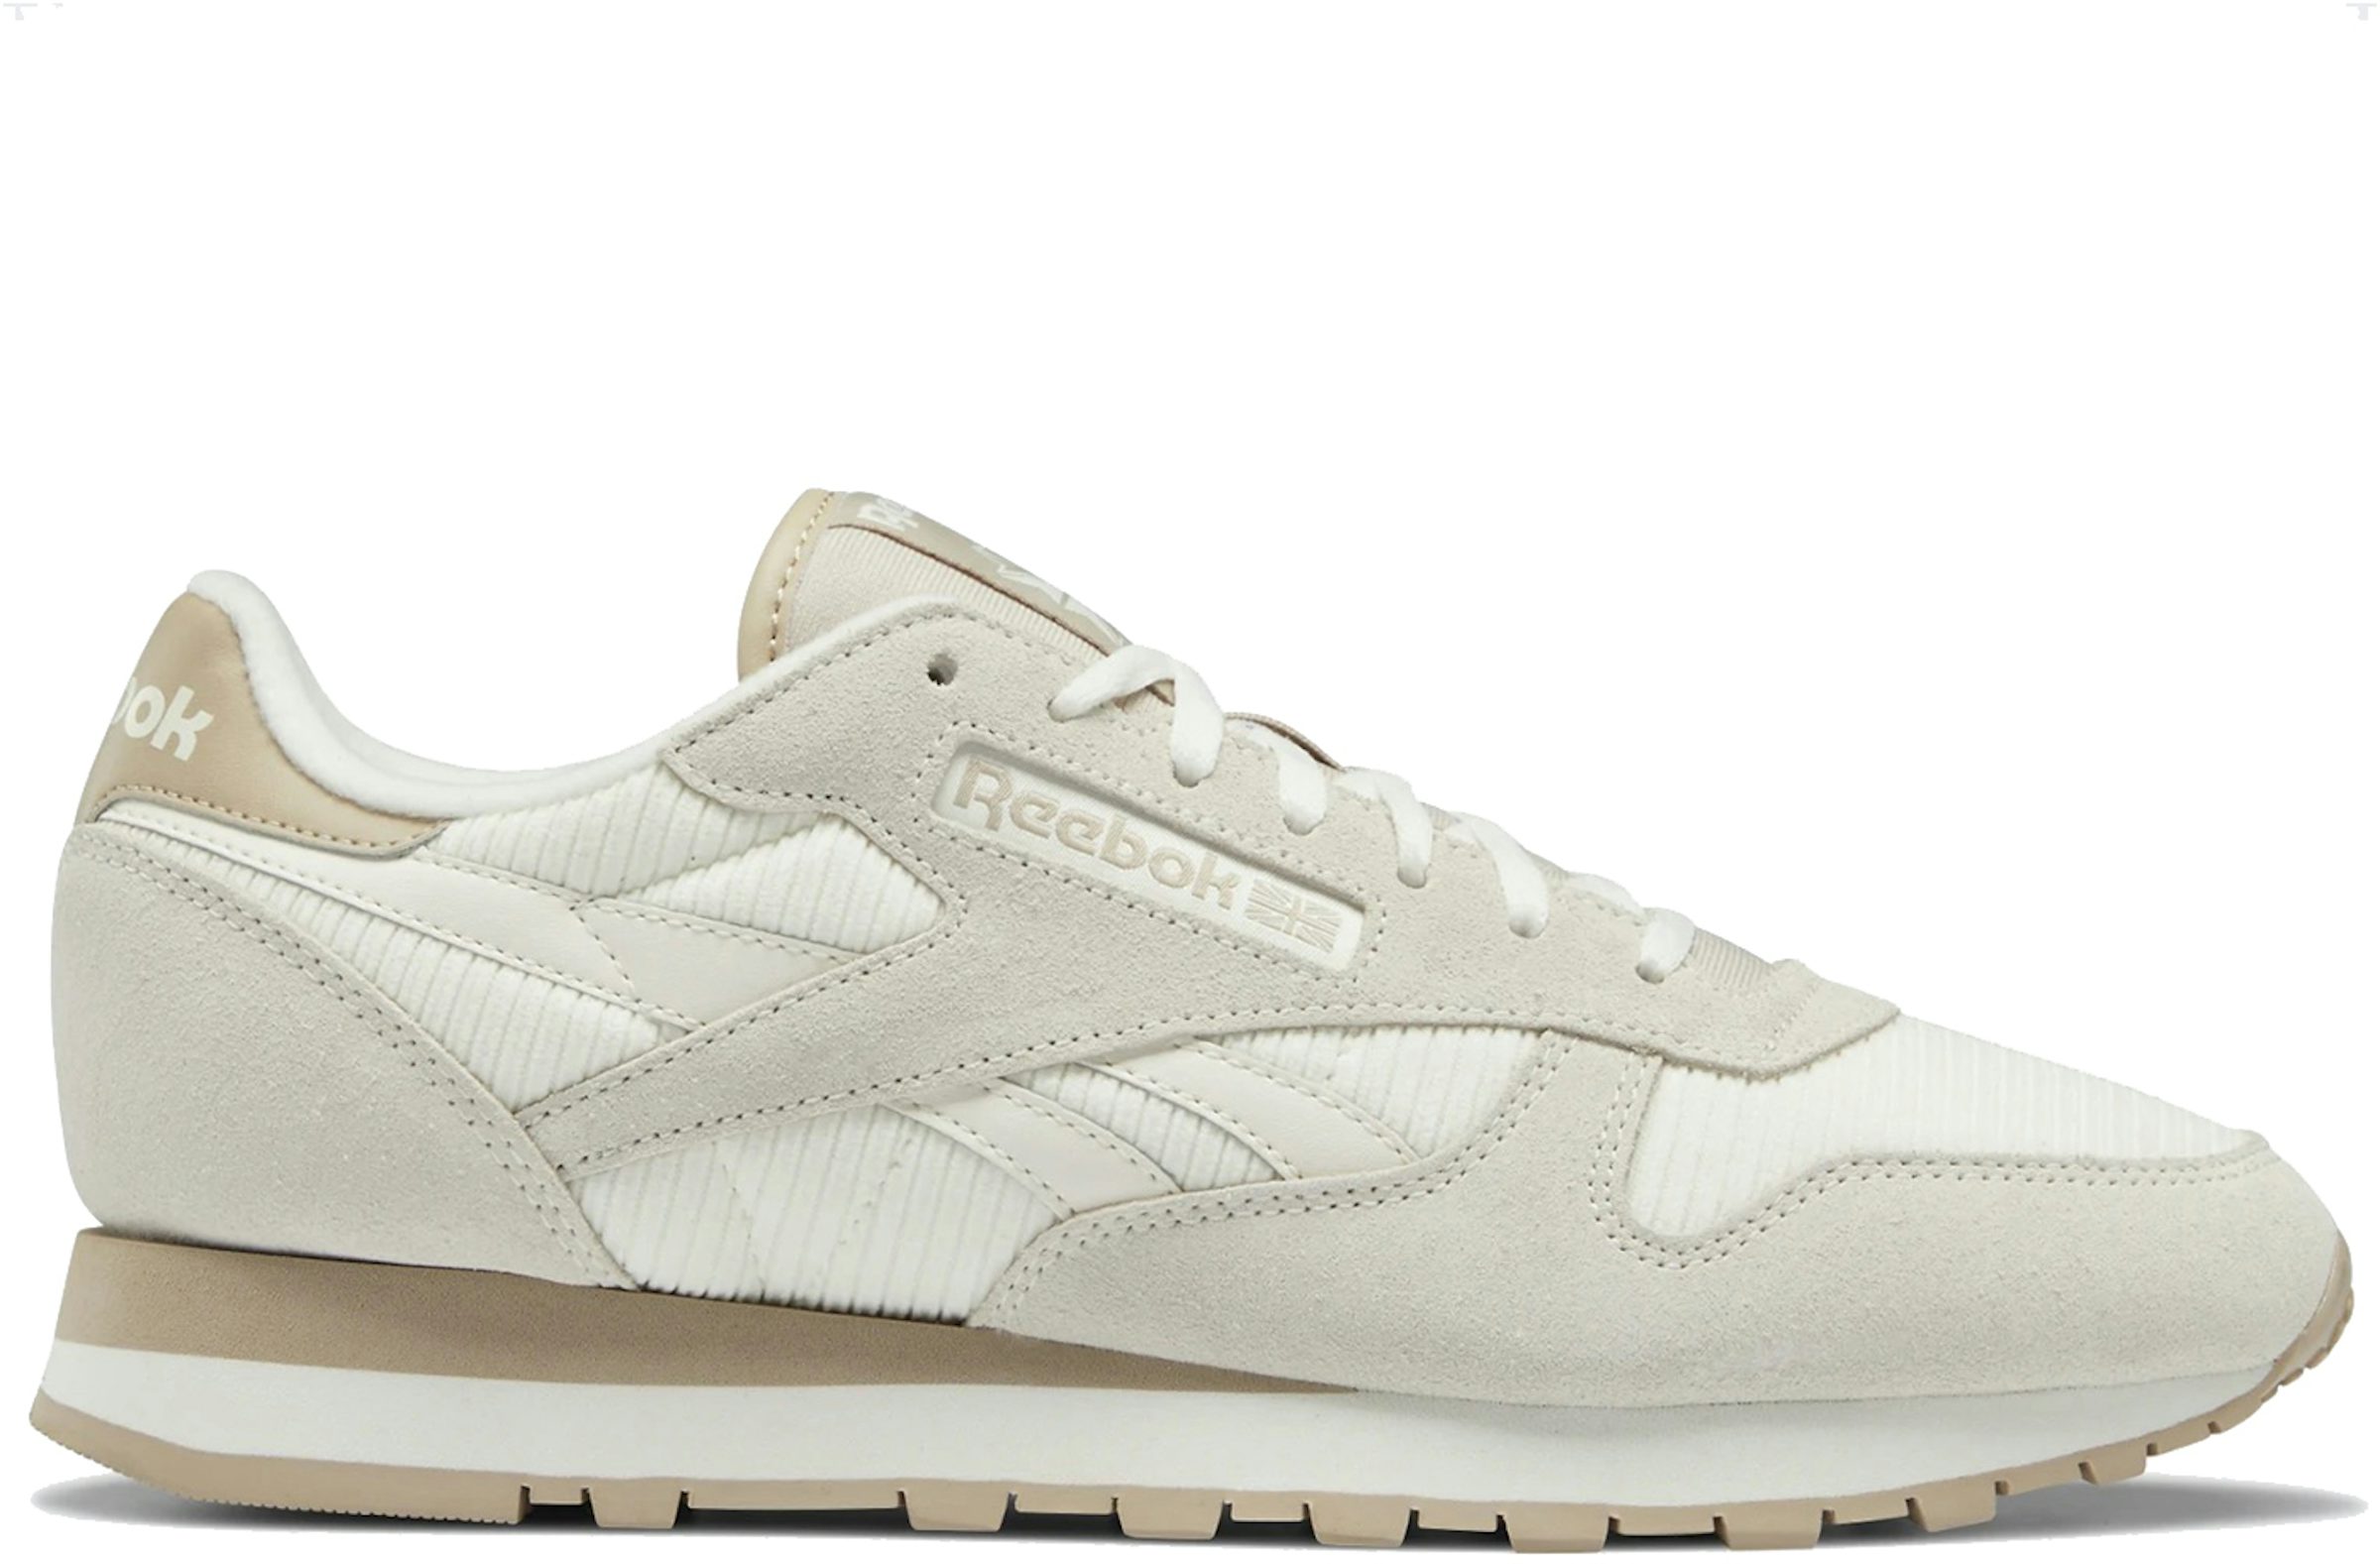 Reebok Classic Leather Shoes - StockX